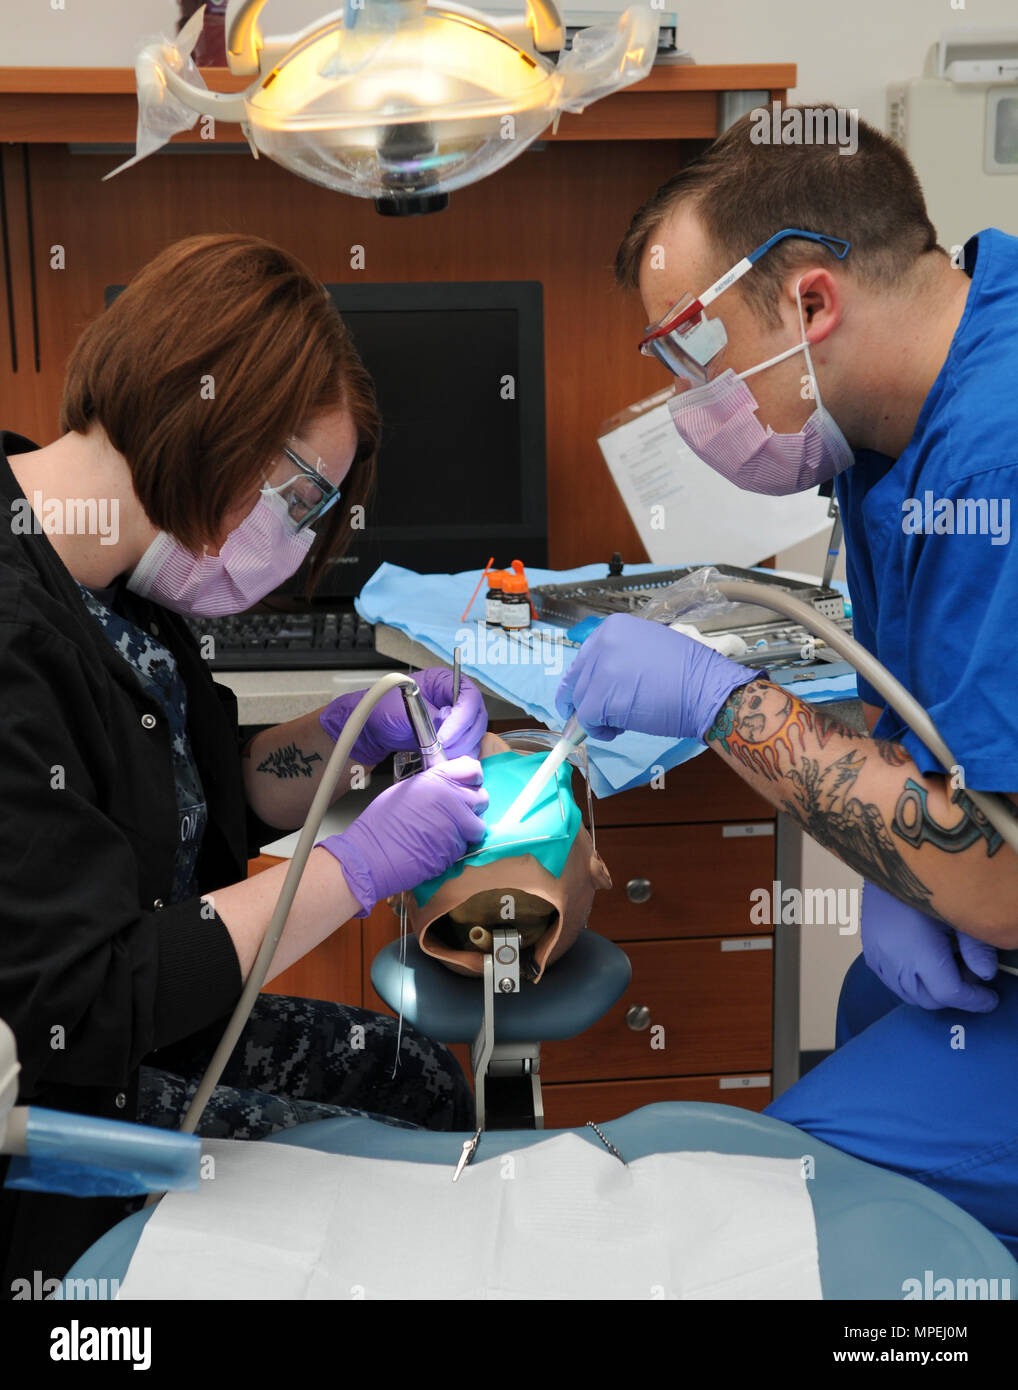 SAN ANTONIO (Feb. 14, 2017) Hospital Corpsman 2nd Class Tandem Anderson, left, a dental instructor at the Medical Education and Training Campus (METC), trains Hospitalman Corbin Morgan on chair-side assistance as part of the Navy Dental Assistant Program at METC on board Joint Base San Antonio - Fort Sam Houston, Texas. The program is designed to give students the basic understanding of oral anatomy, dental administration and dental procedures and provides hands-on training in infection control, general chair-side assistance and radiology procedures. (U.S. Navy photo by Mass Communication Spec Stock Photo